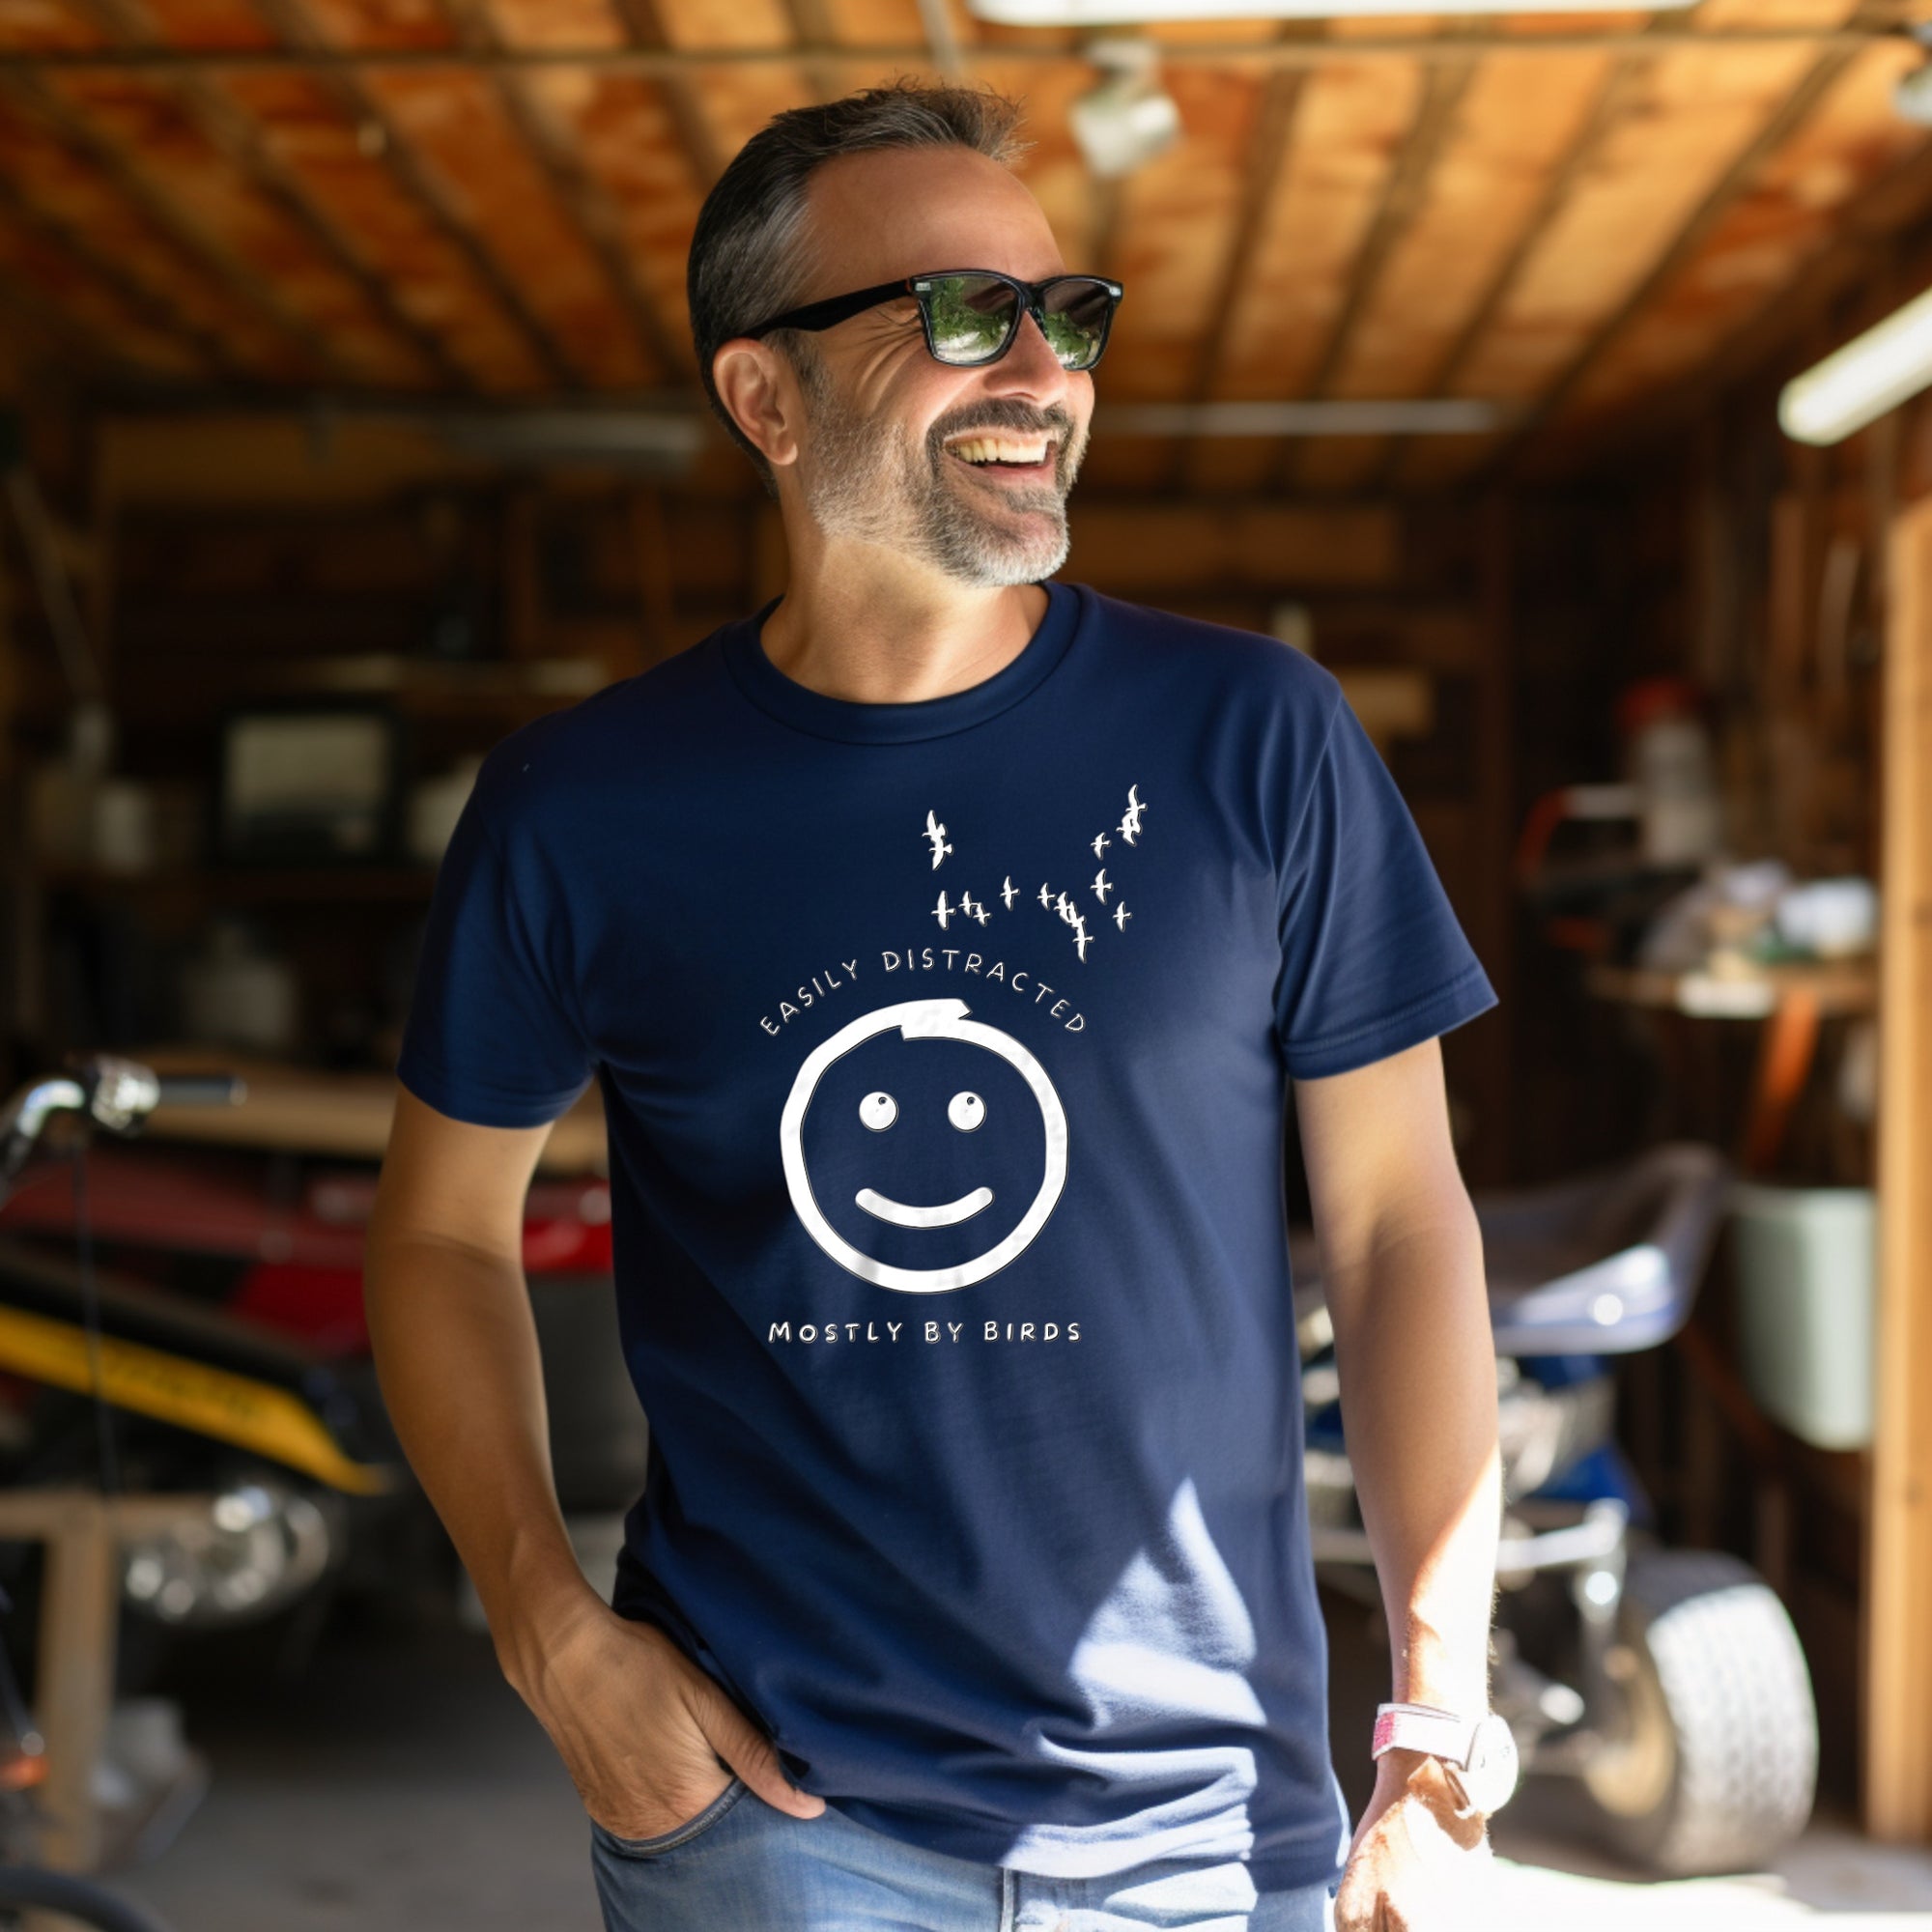 Navy blue unisex bird t-shirt with a smiley face looking up and to the side at a flock of birds surrounded by the words, "Easily Distracted" above and, "Mostly by Birds" below. Worn by a man in a shed or garage.